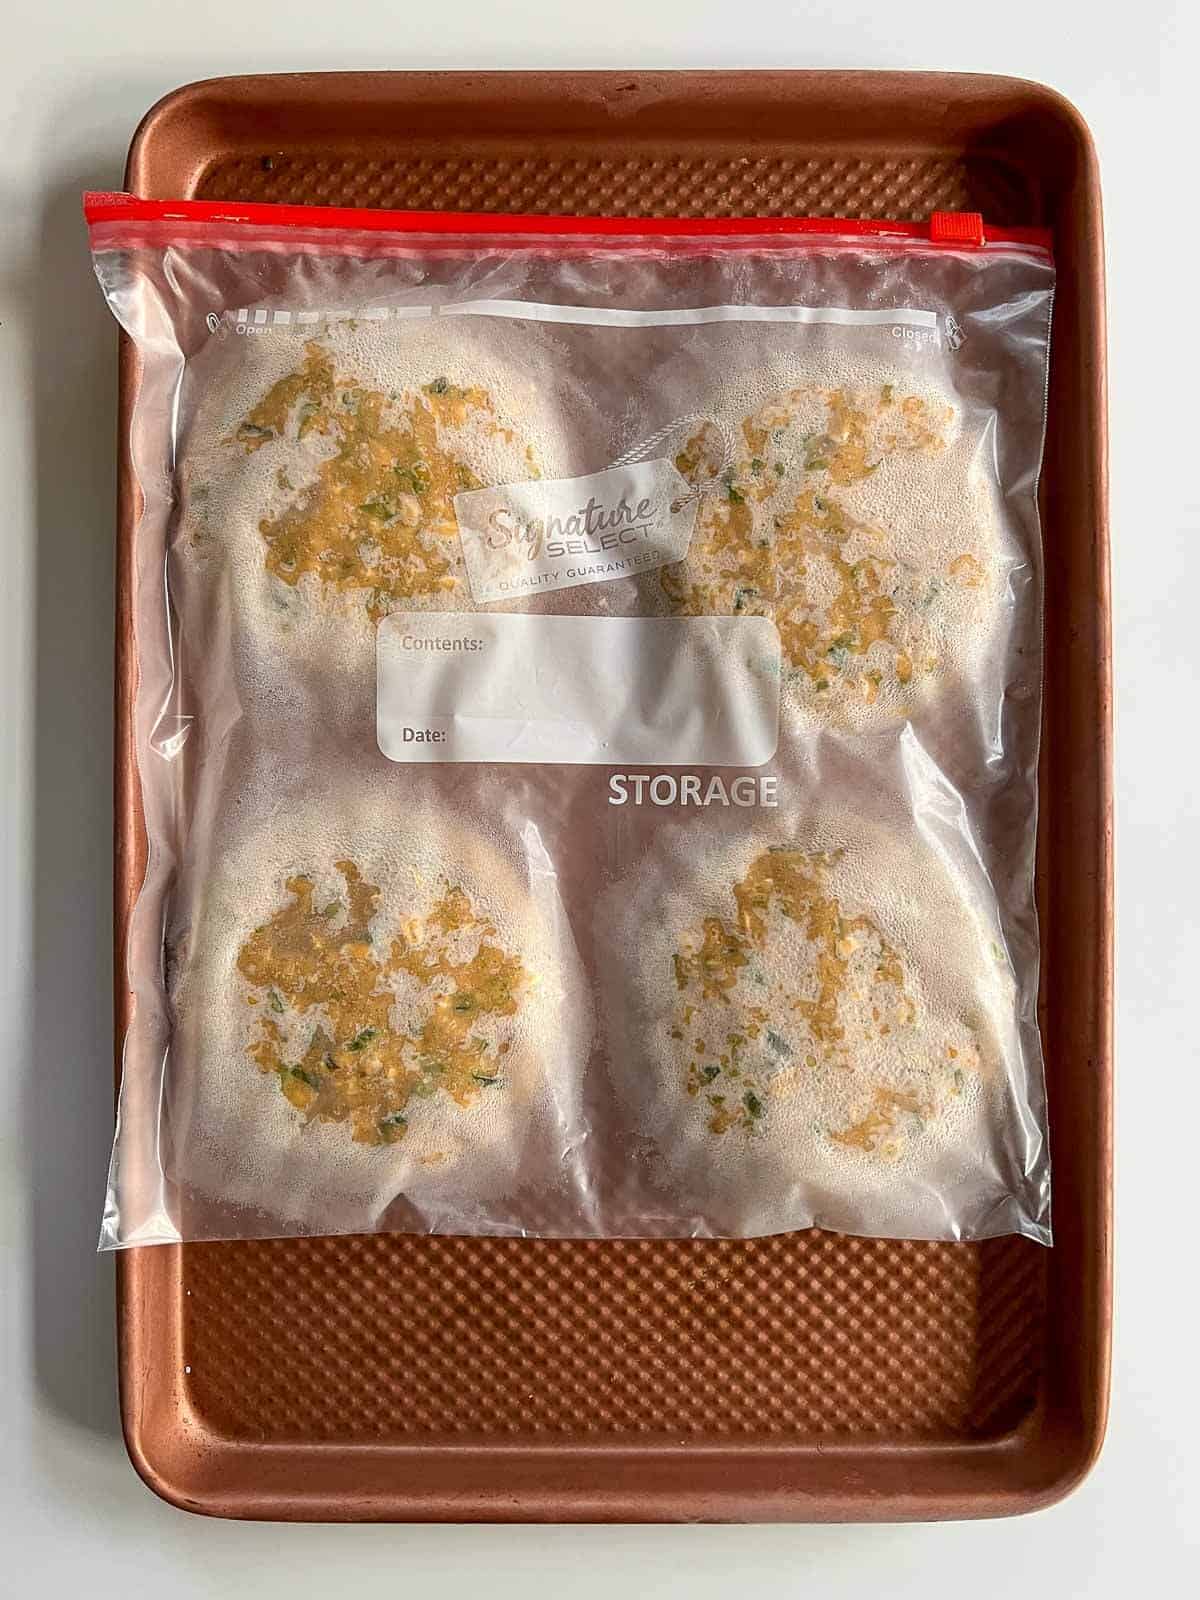 frozen chickpea burgers stored in the freezer in a plastic bag.